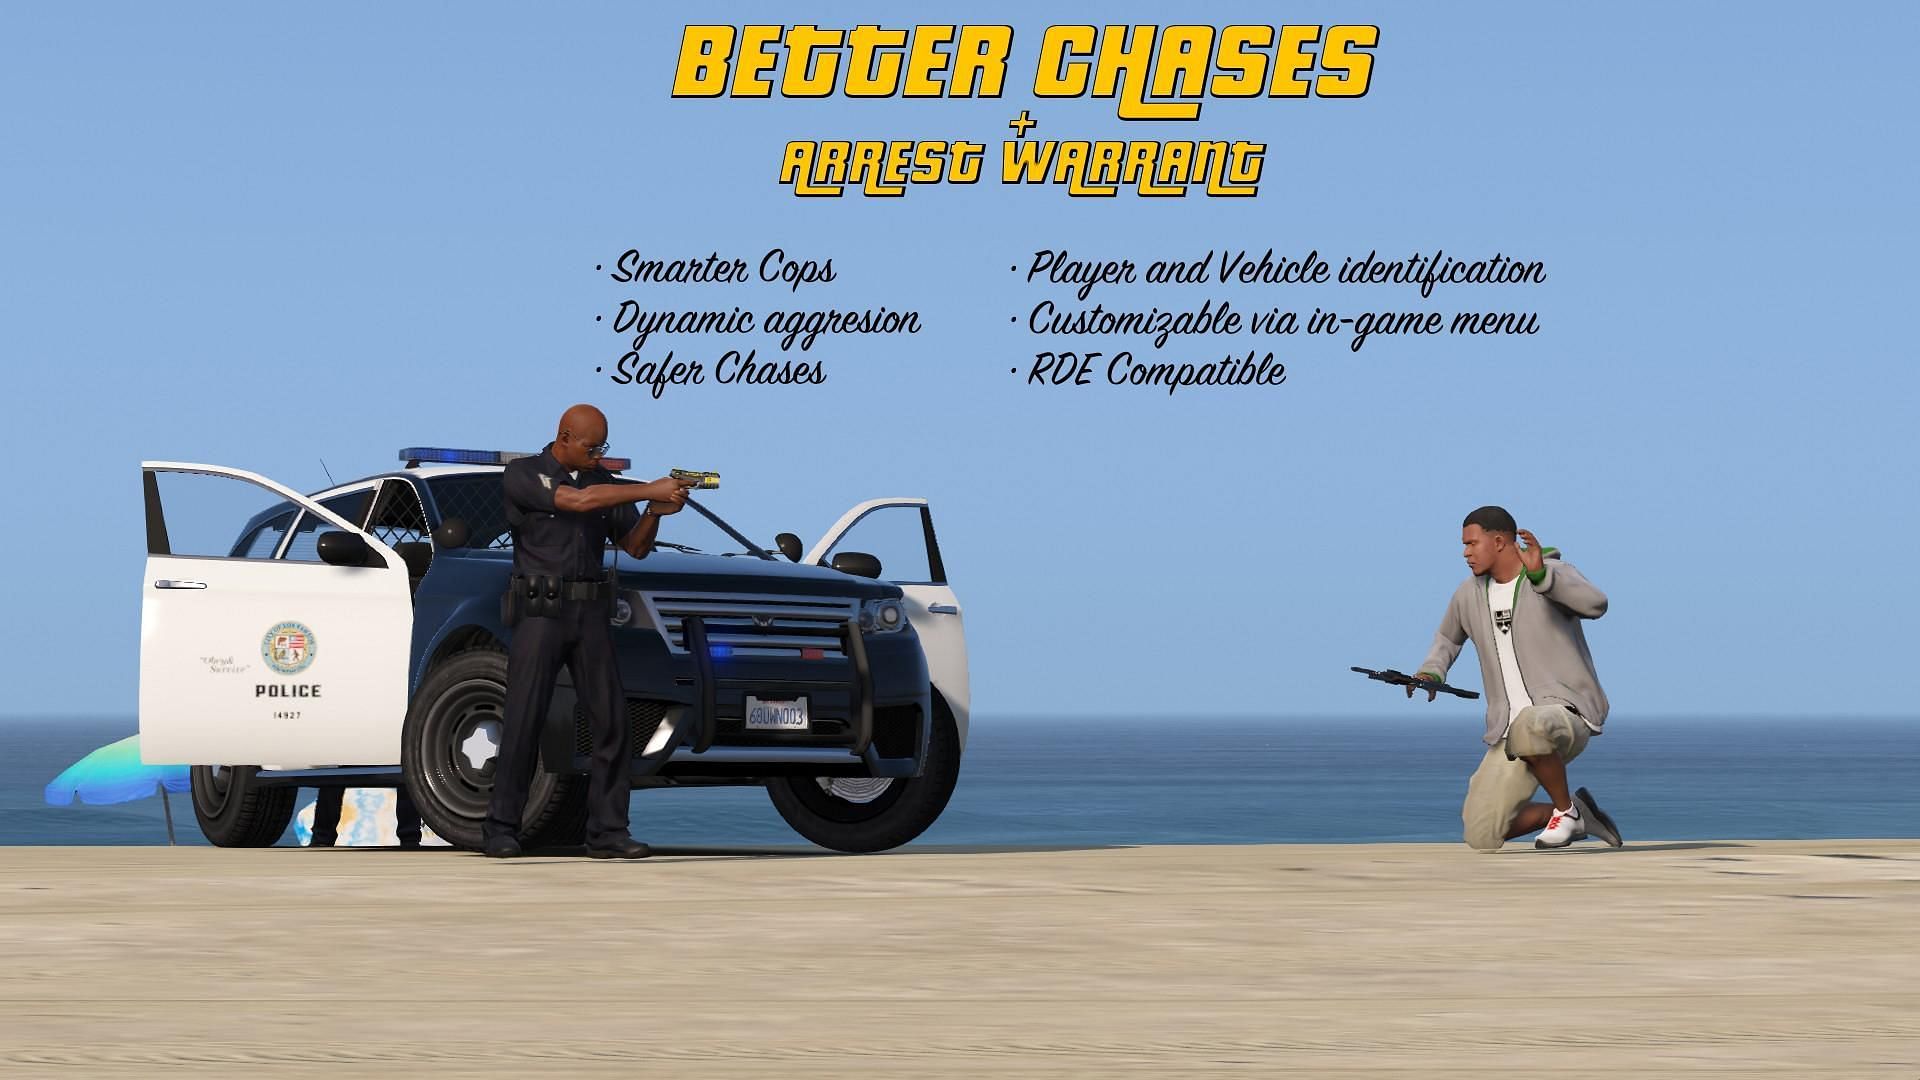 Police Chases in GTA 5 were always too wasy. Not anymore [Image via GTA5-Mods.com]